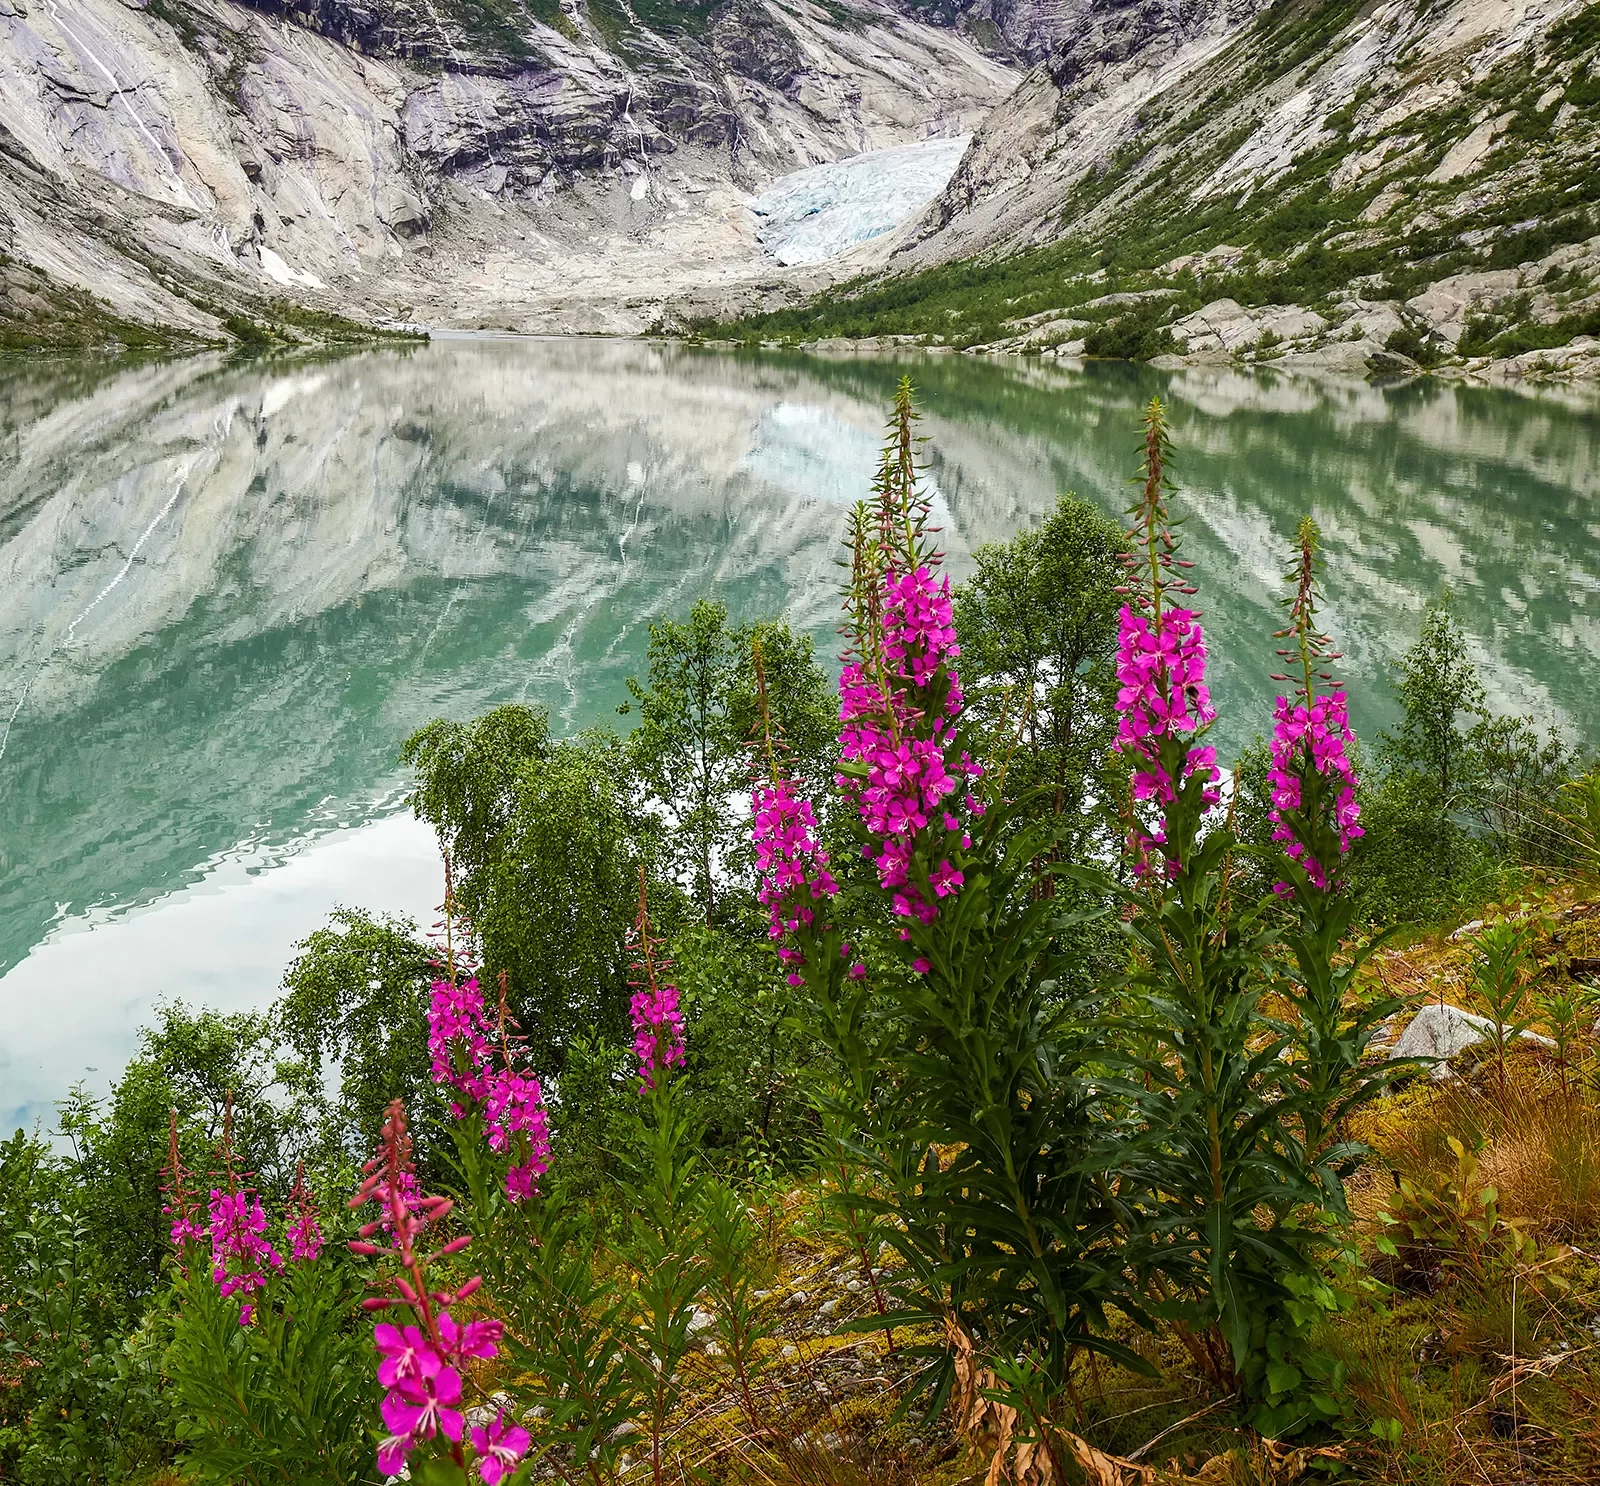 View of mountain reflecting in lake with pink wildflowers in the foreground.